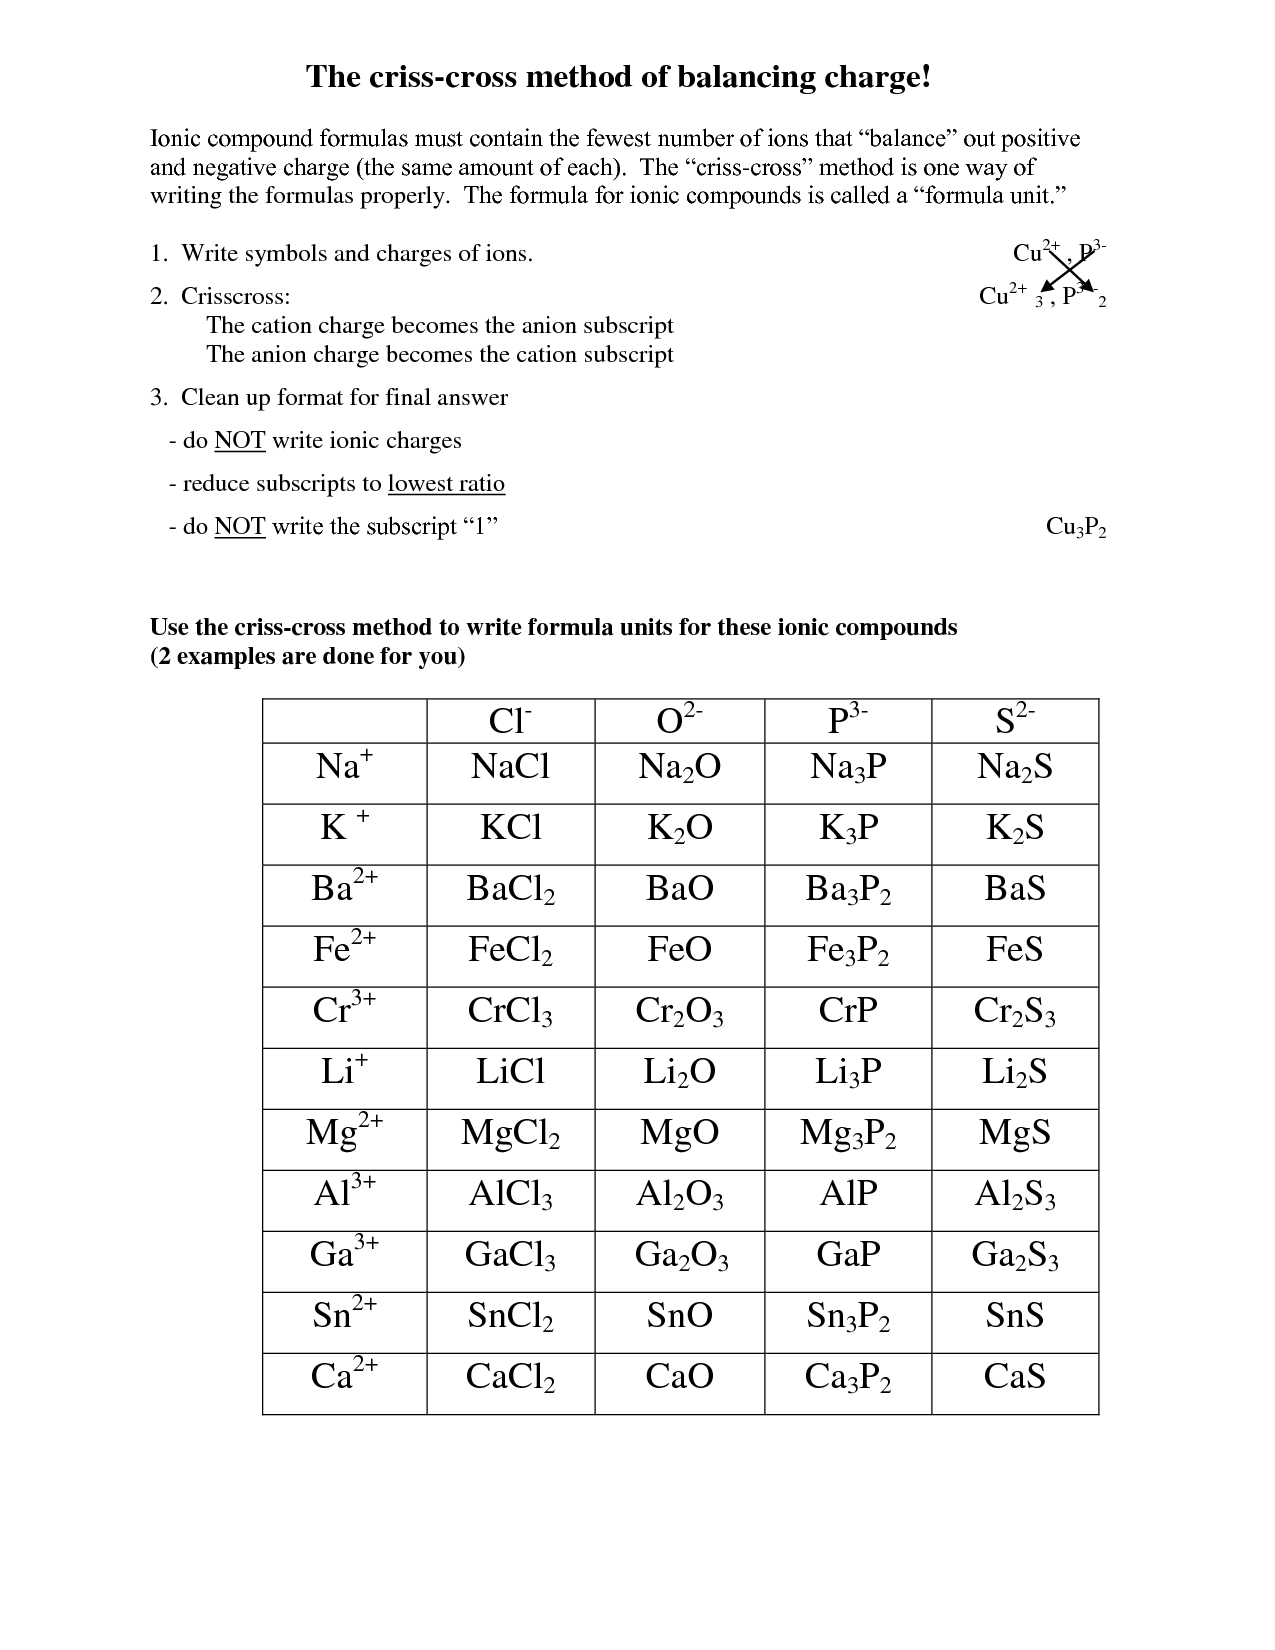 criss-cross-method-for-chemical-formulas-college-paper-example-db-excel